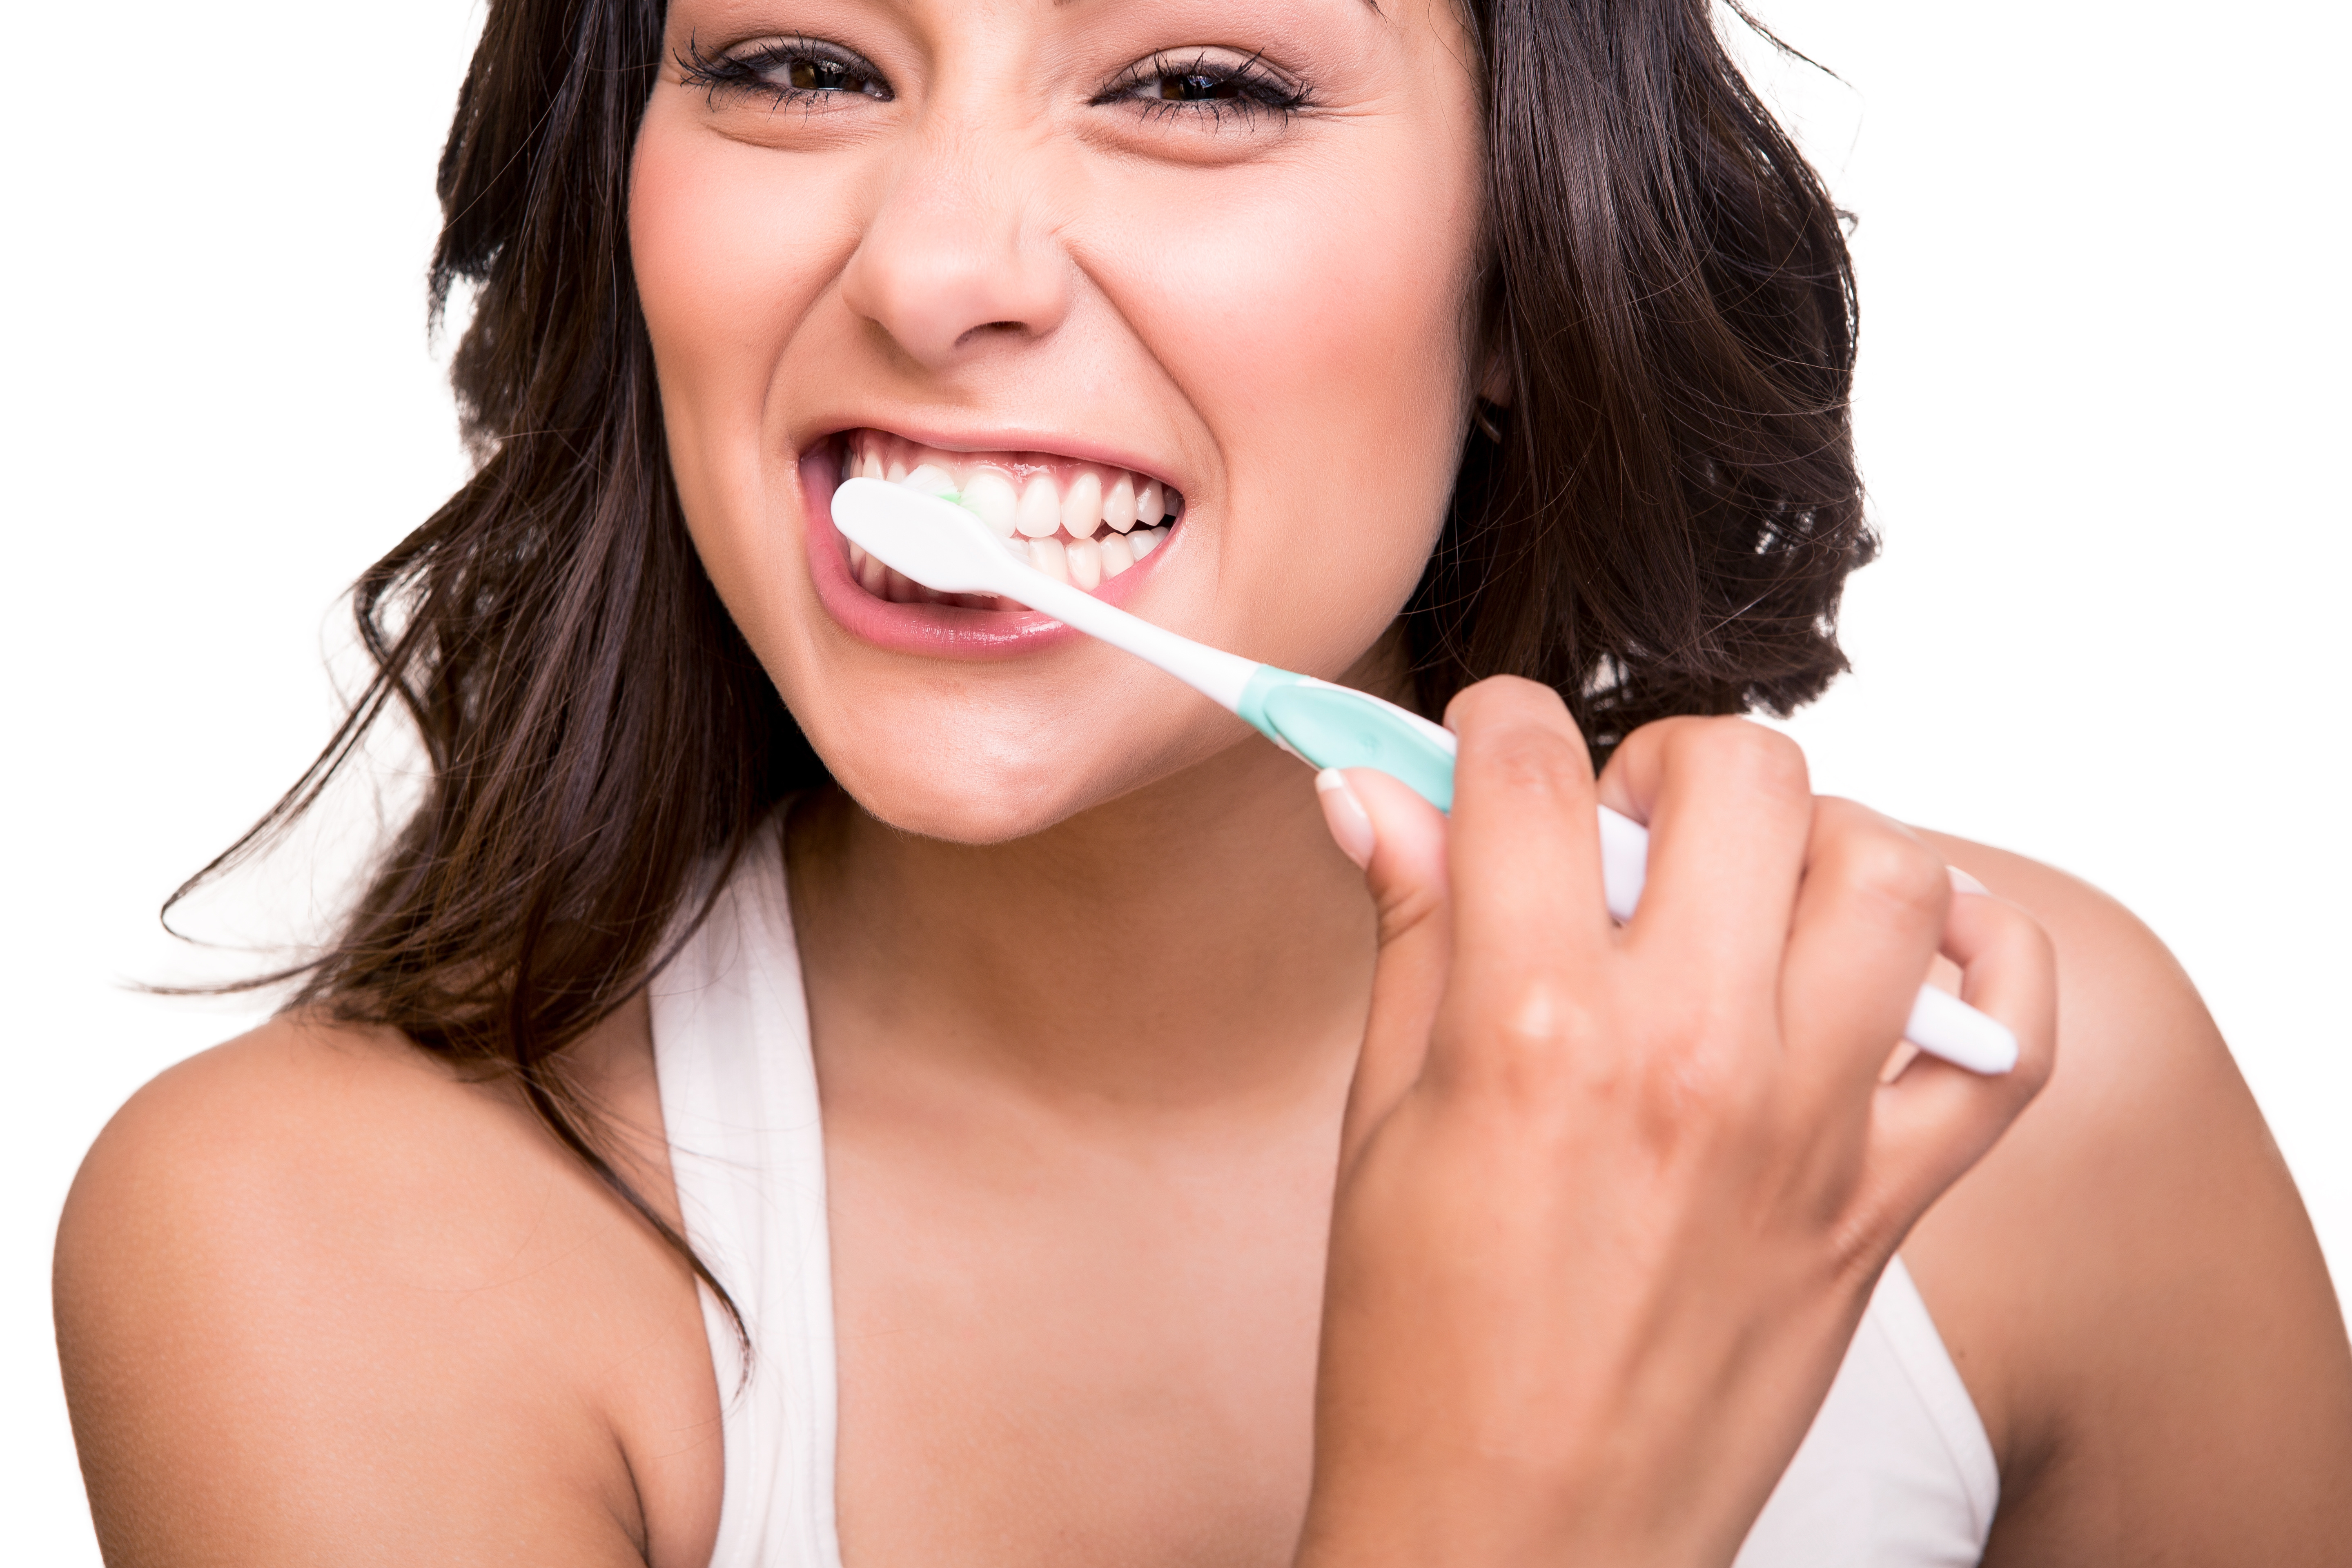 Woman holding a tooth brush